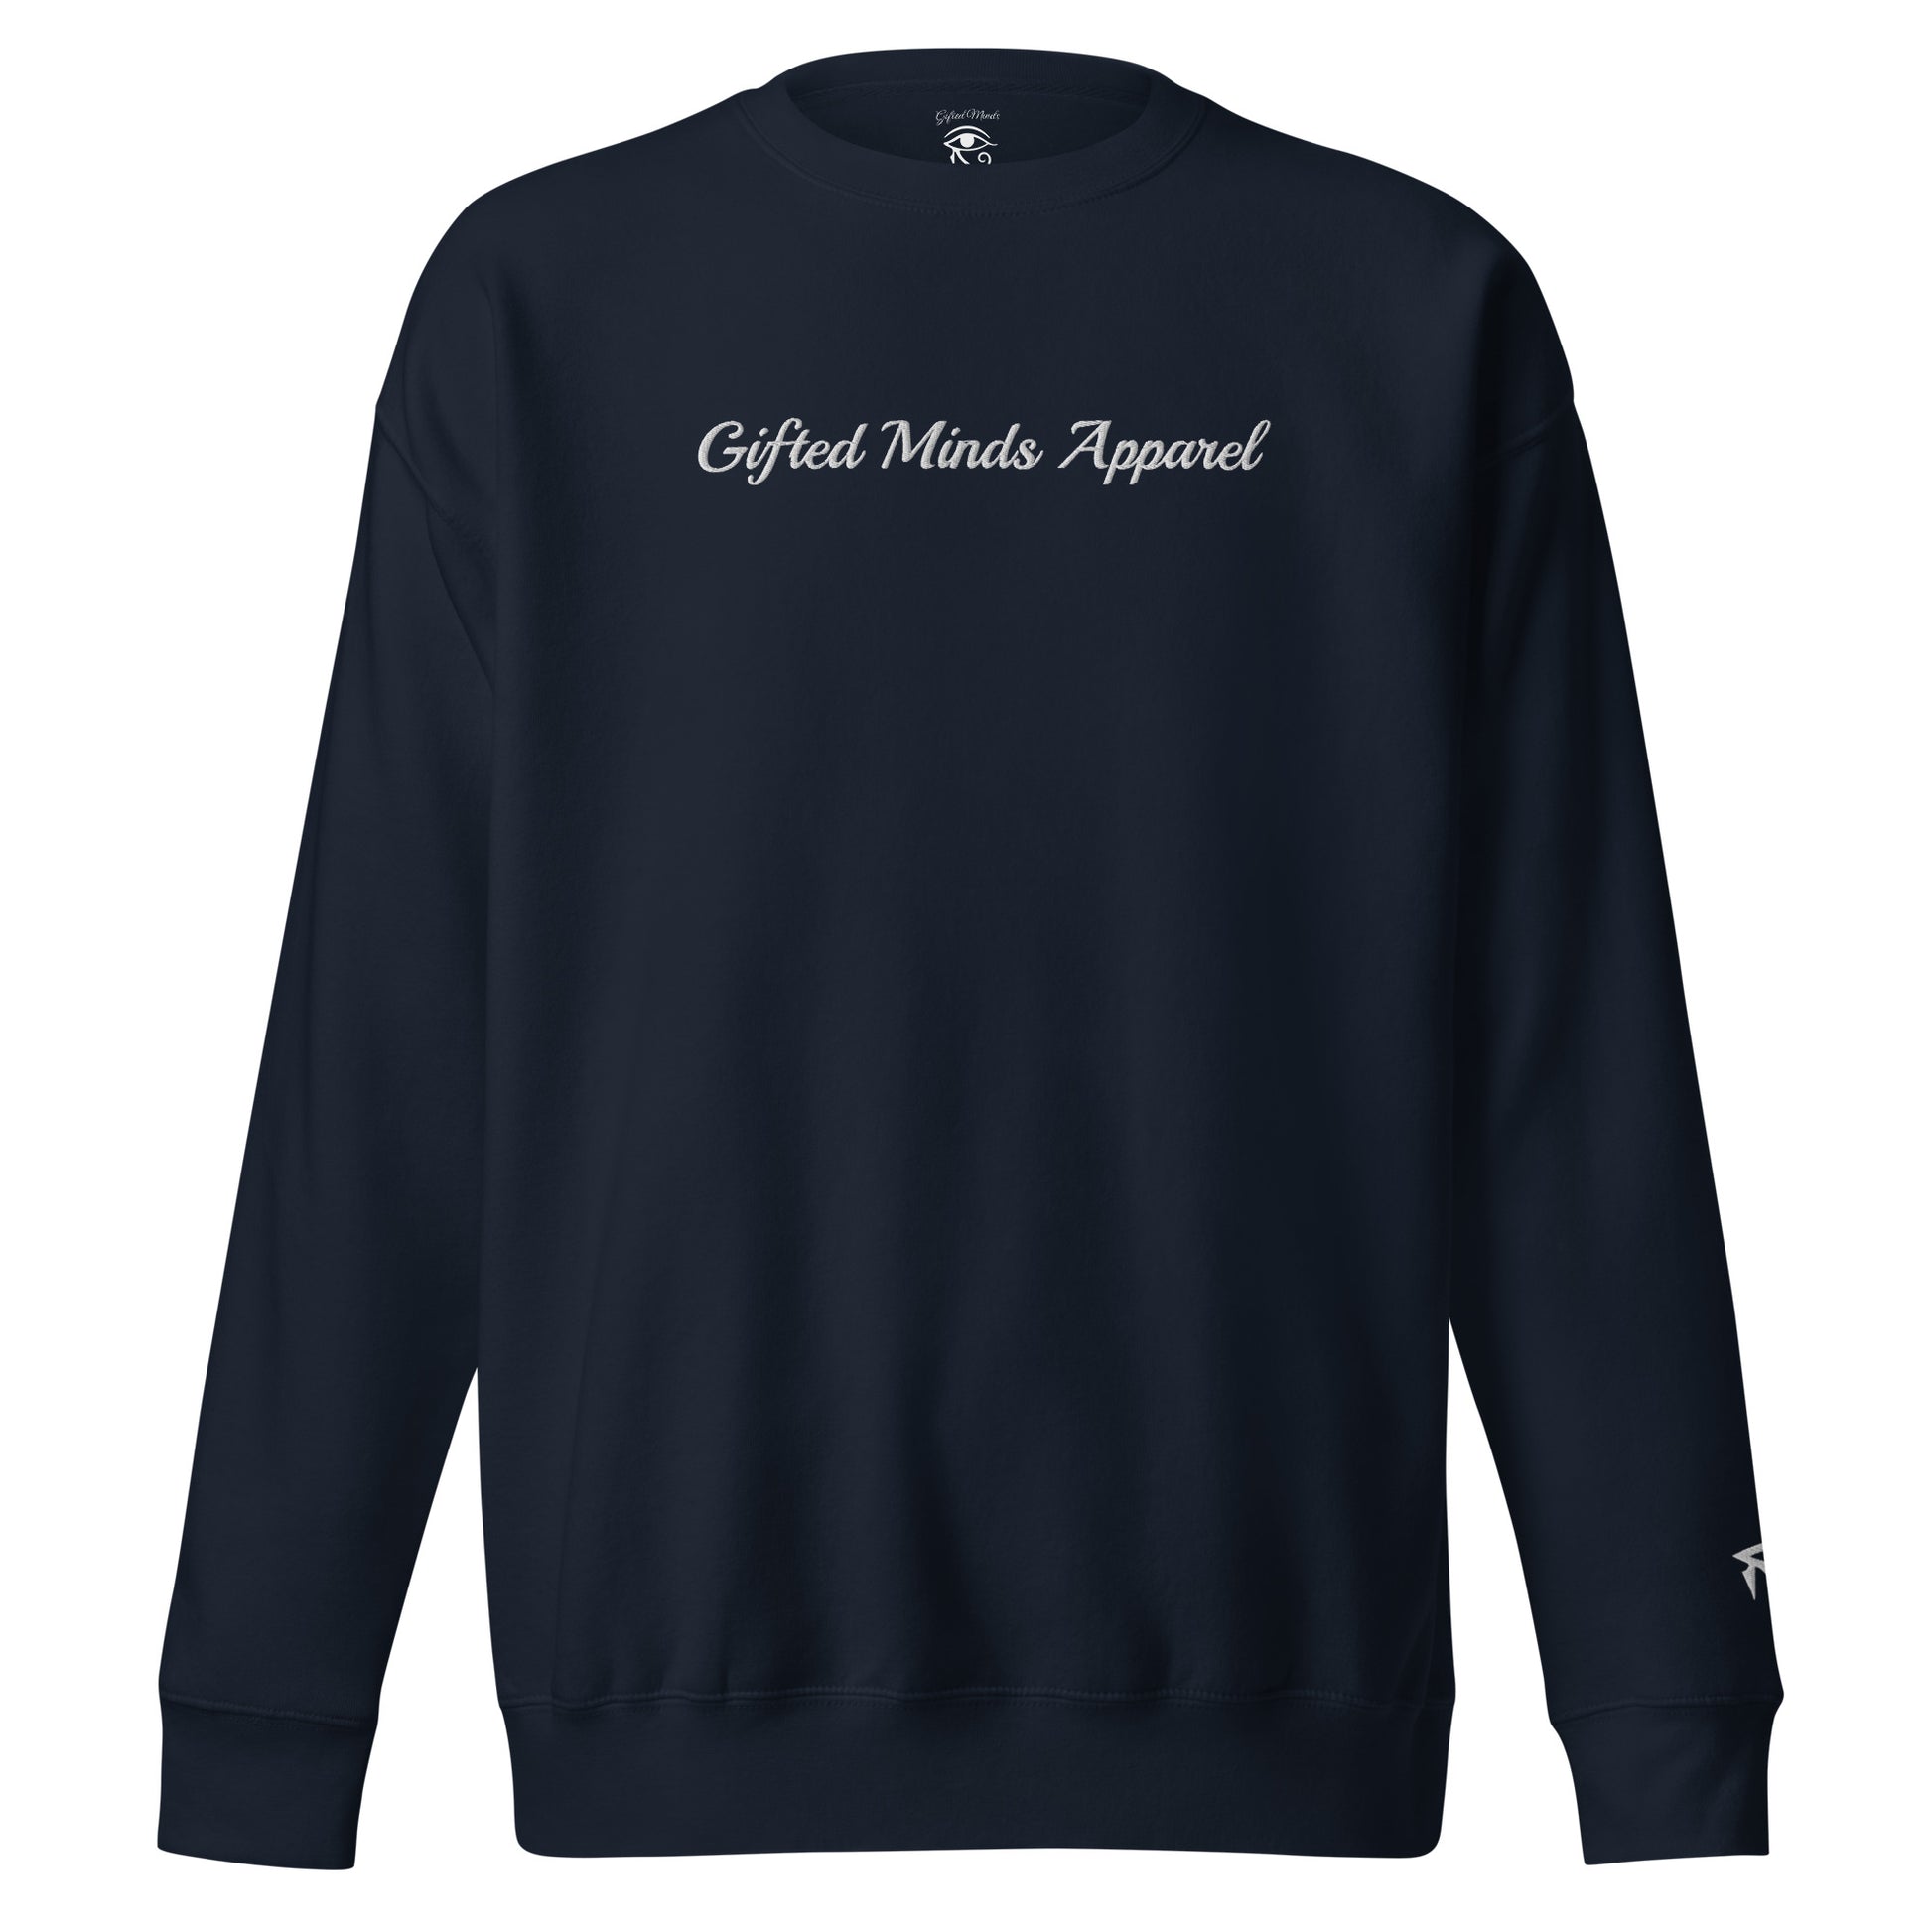 Gifted Minds Embroidered Script Sweatshirt - GFTD MNDS